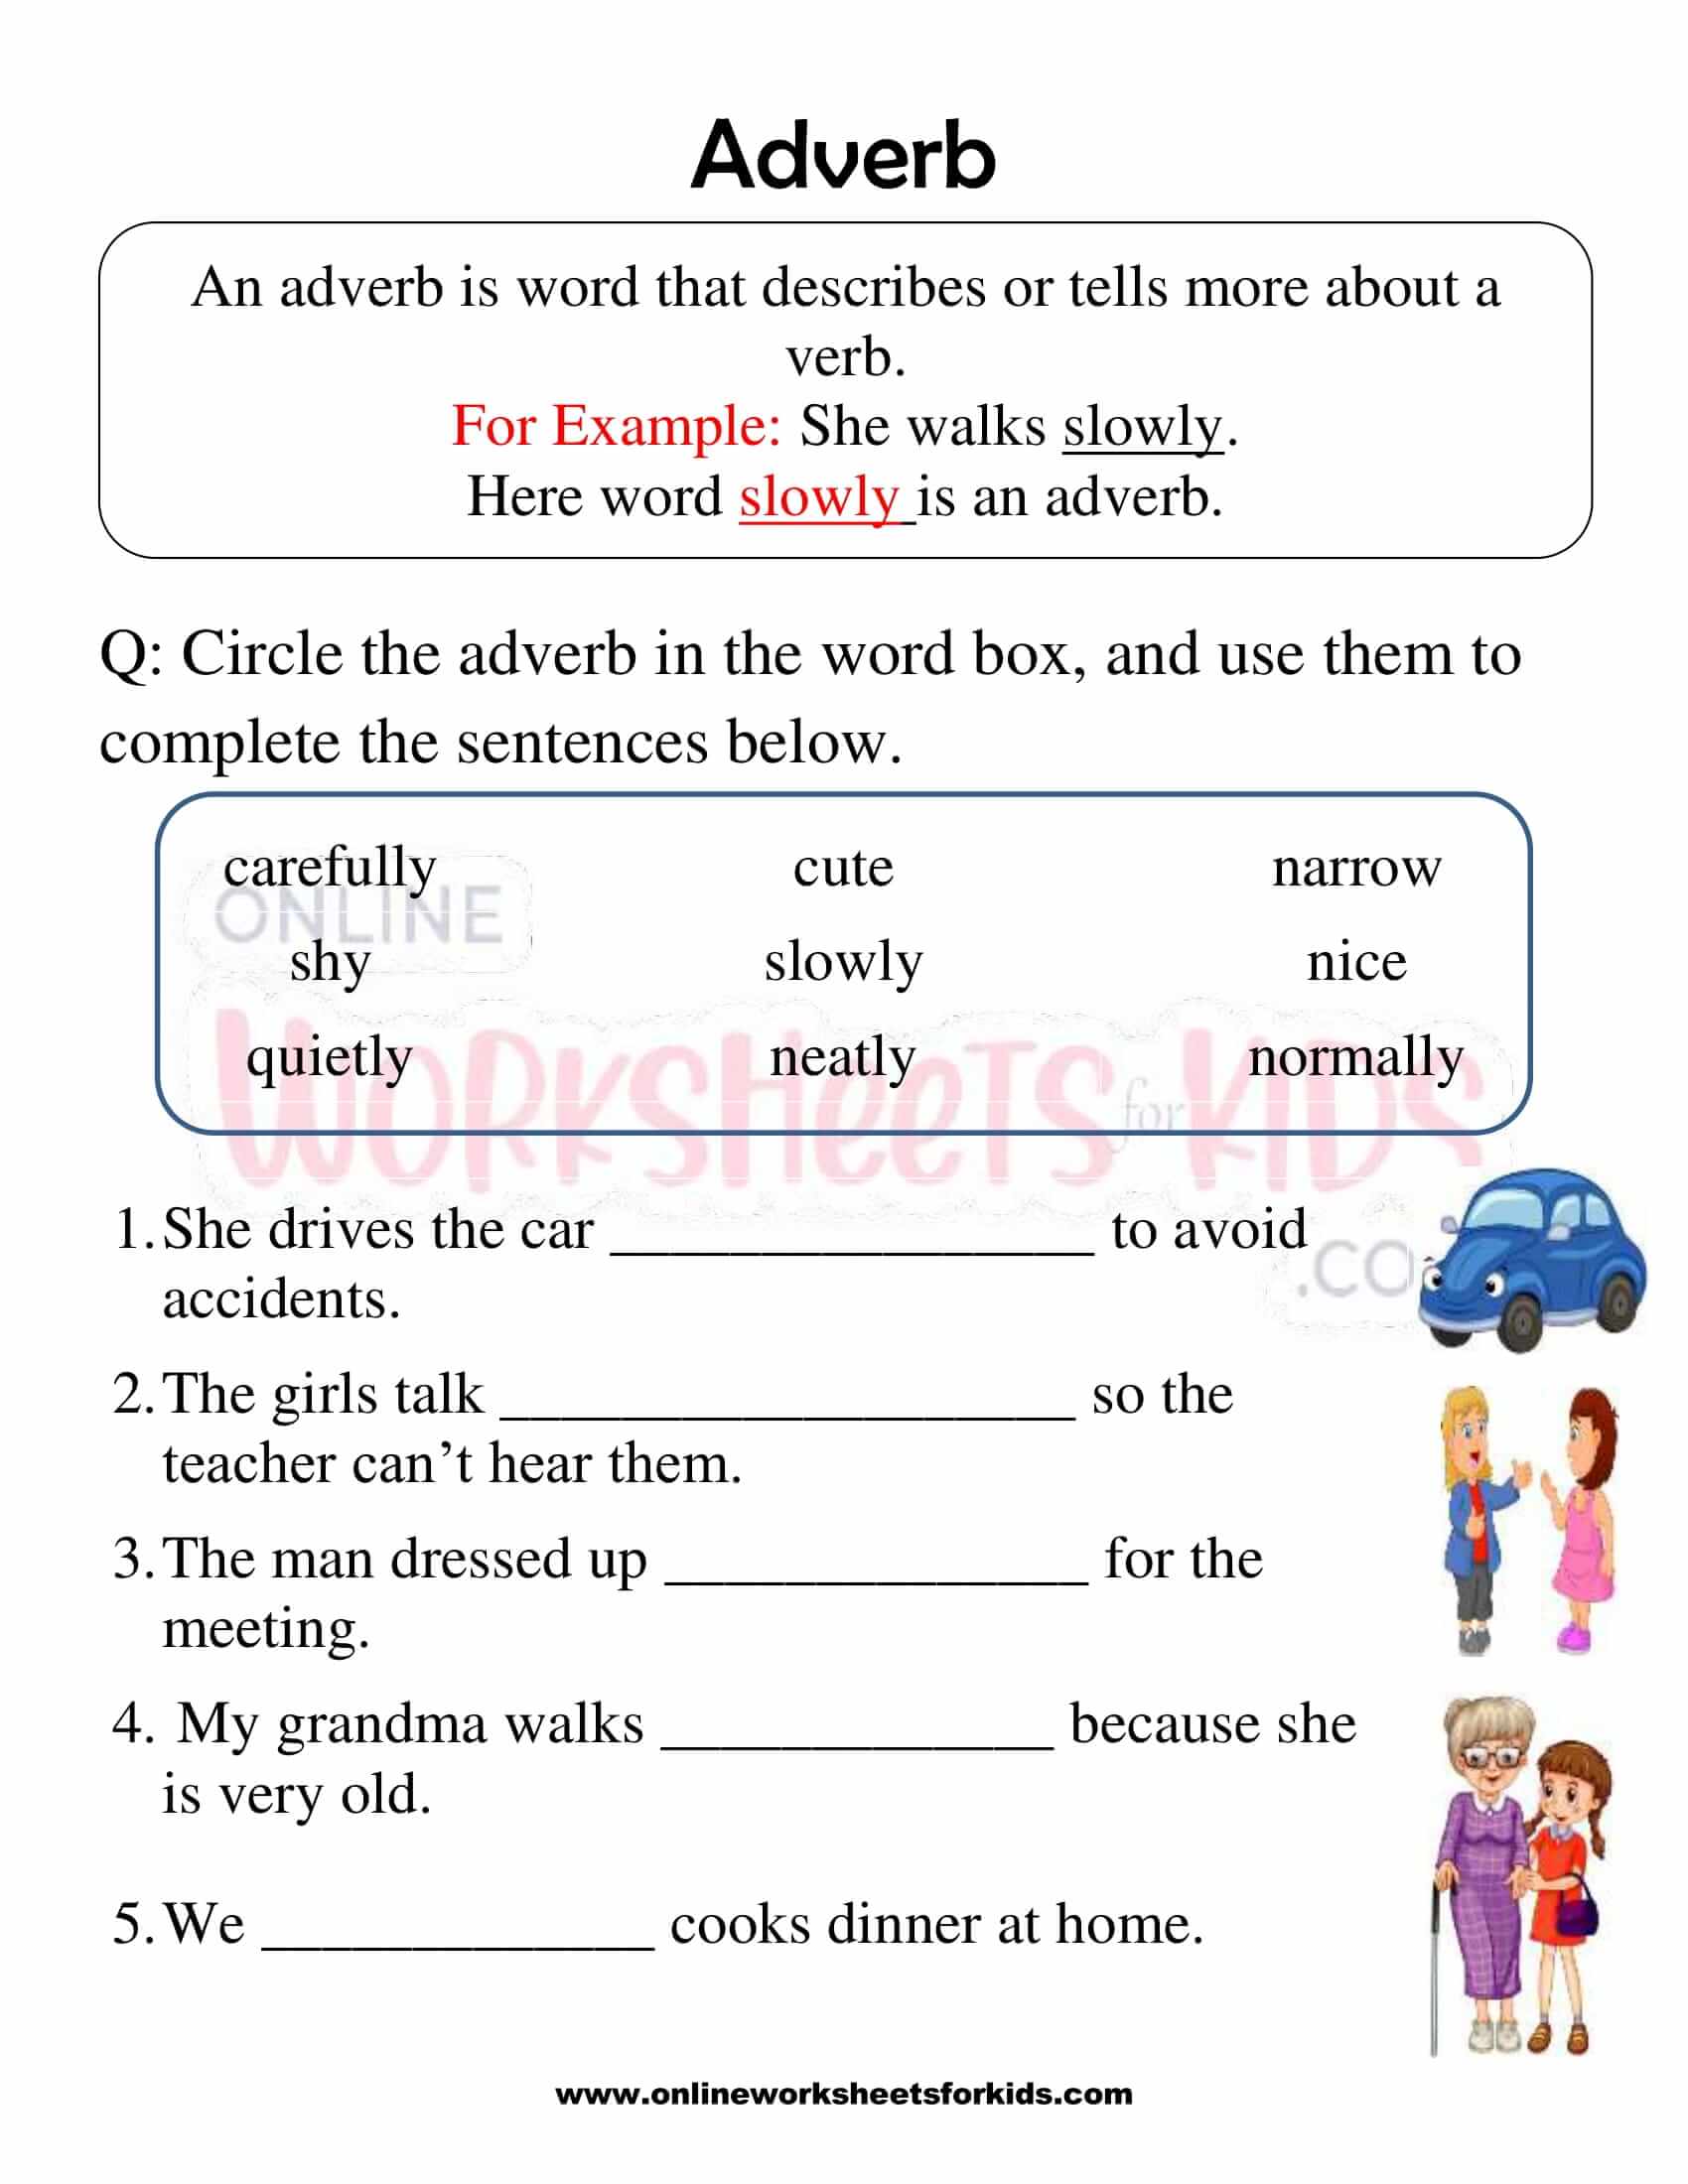 english-worksheets-for-class-1-adverbs-articles-modals-learnbuddy-in